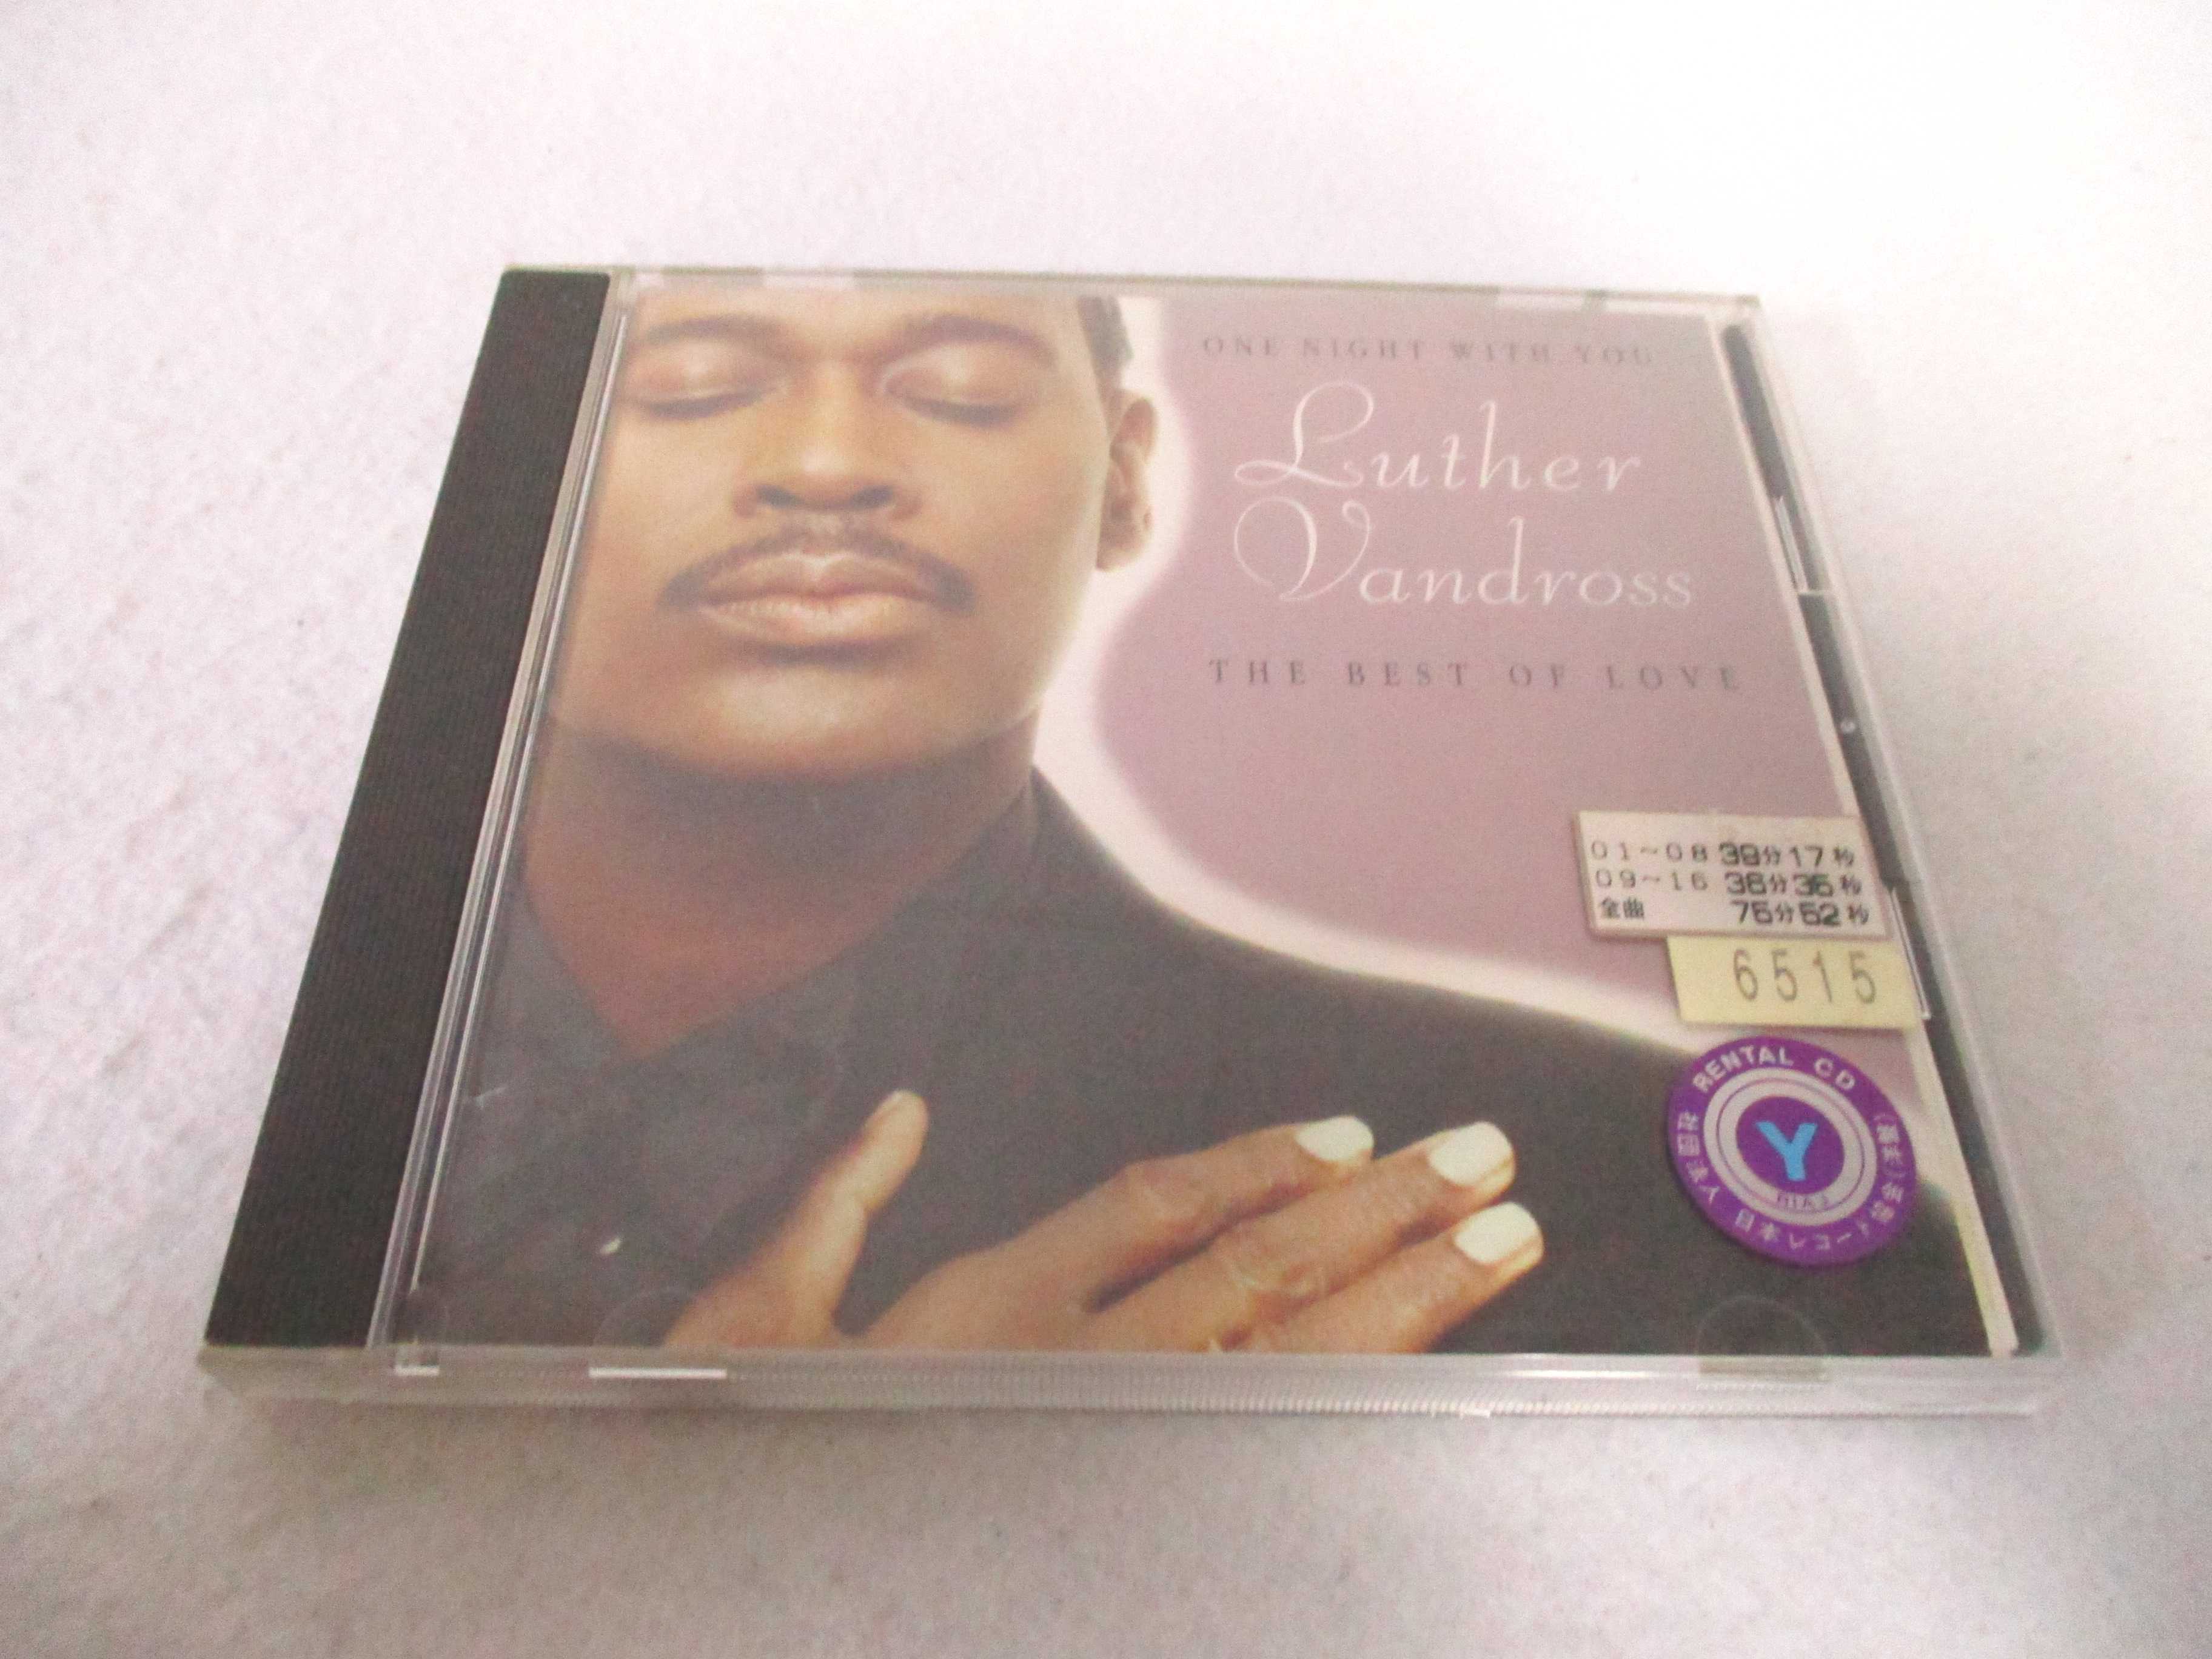 AC05135 yÁz yCDz ONE NIGHT WITH YOUETHE BEST OF LOVE/LUTHER VANDROSS